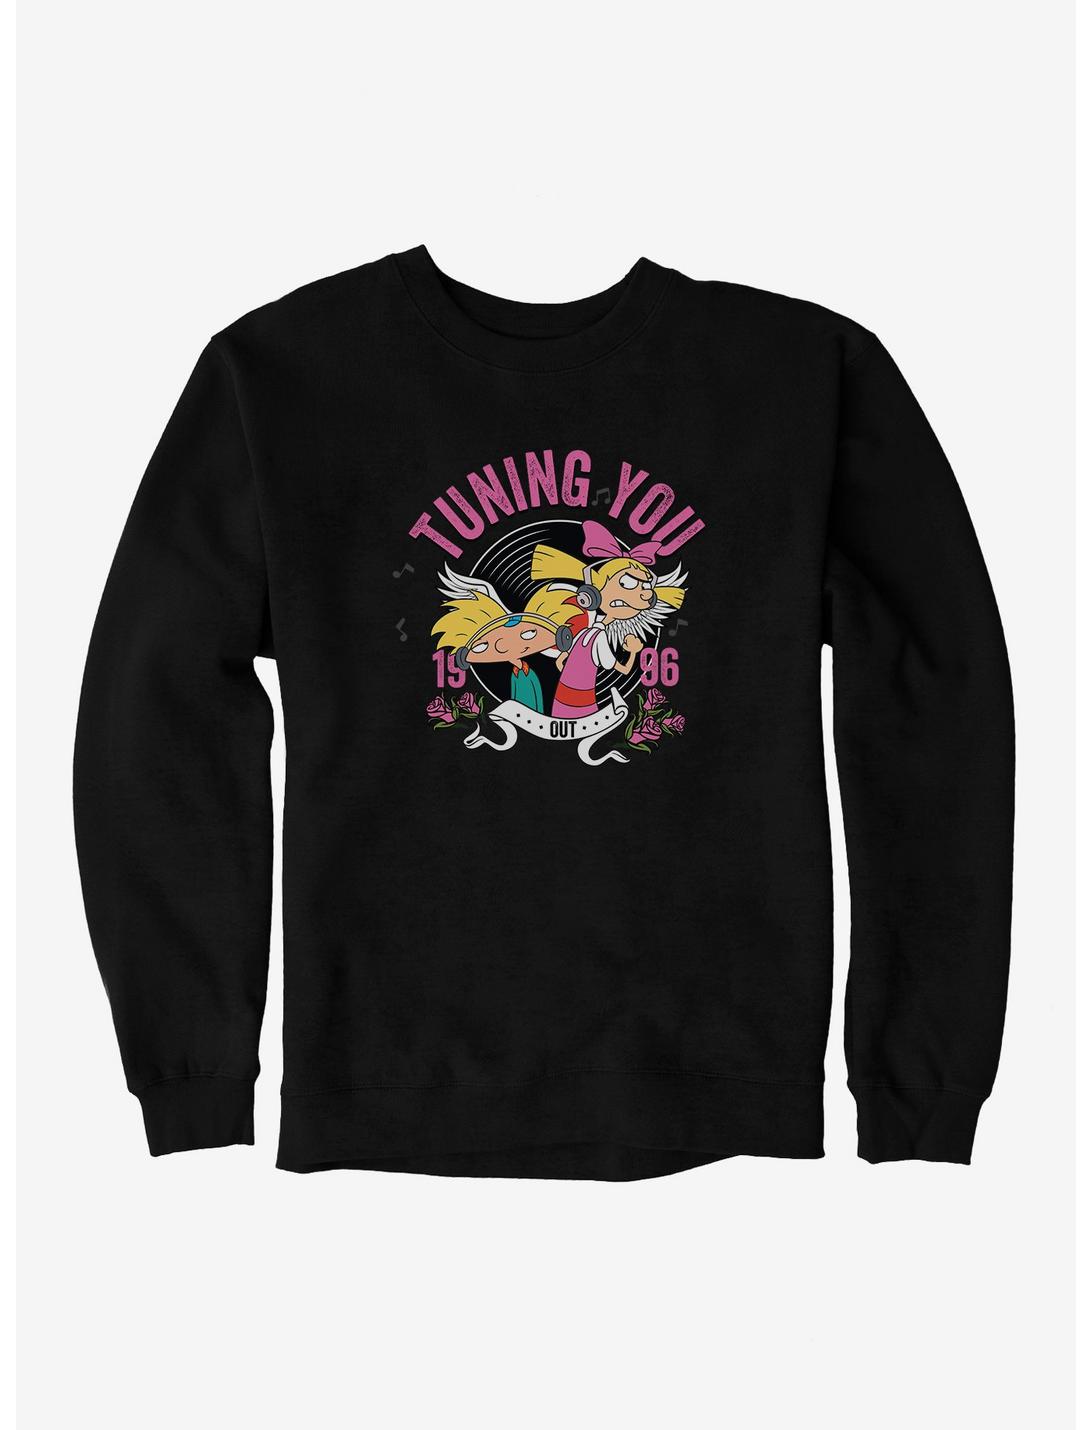 Hey Arnold! Tuning You Out 1996 Sweatshirt, BLACK, hi-res